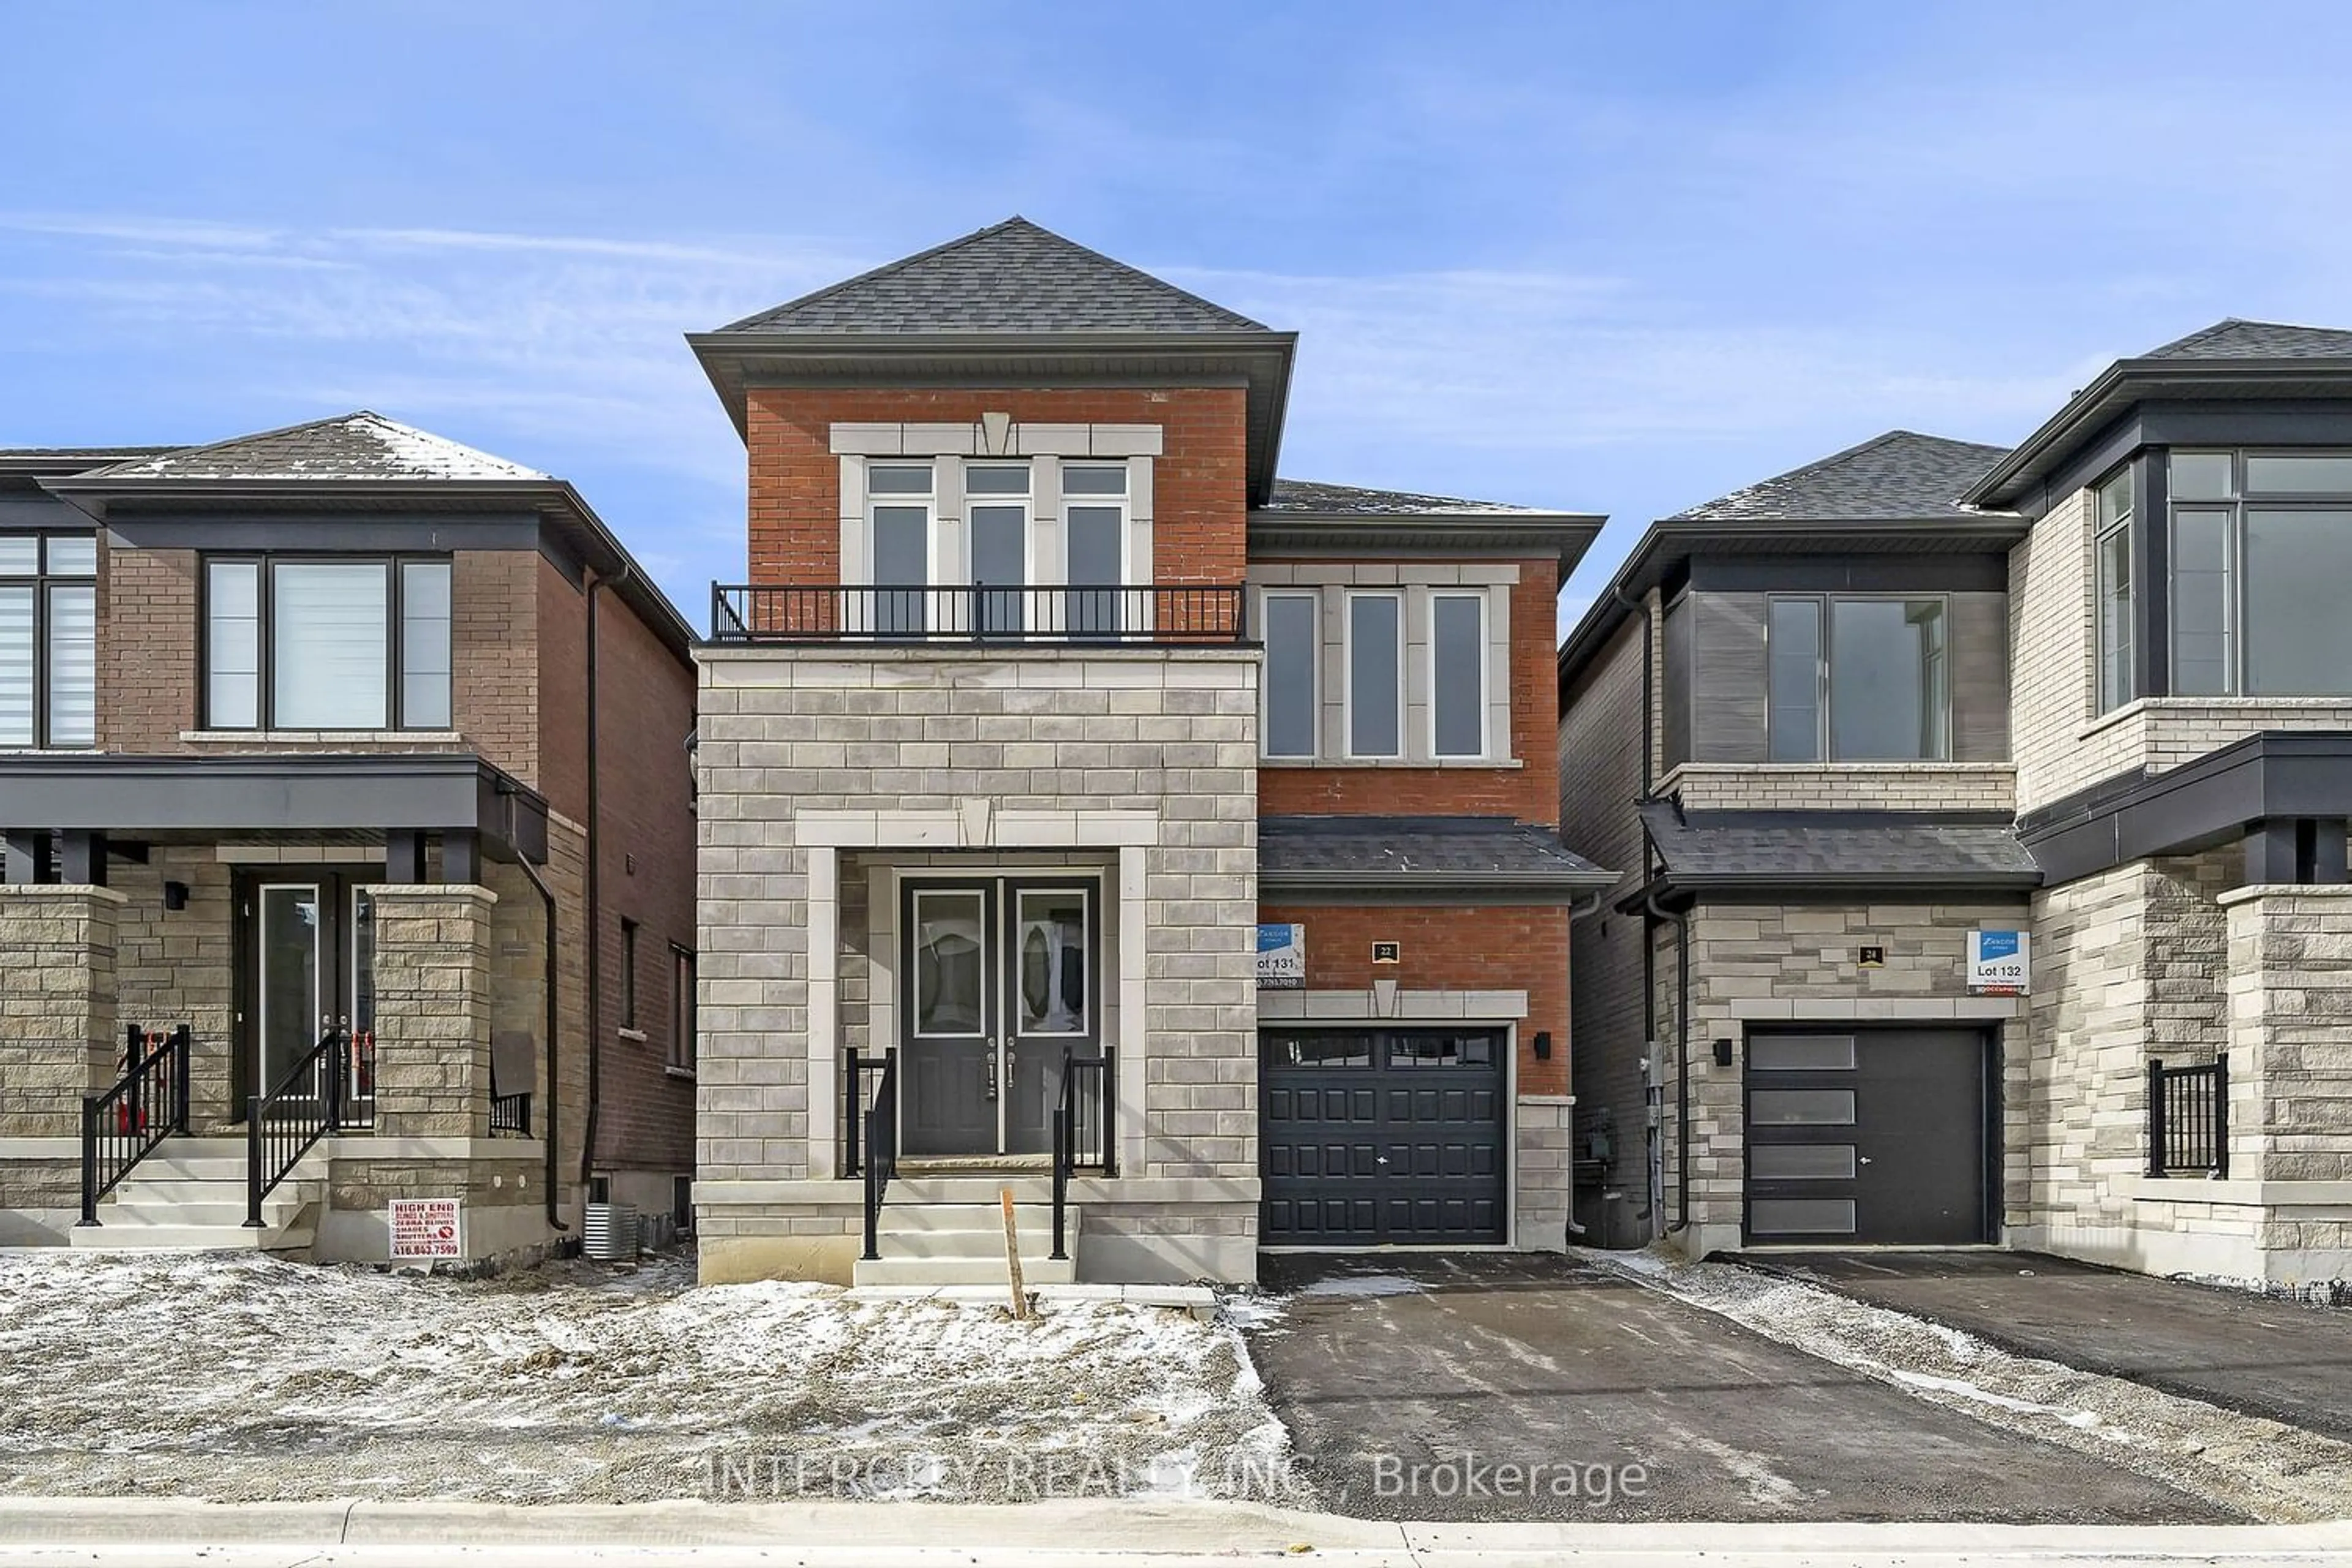 Home with brick exterior material for 22 Ida Terr, Caledon Ontario L7C 4M2